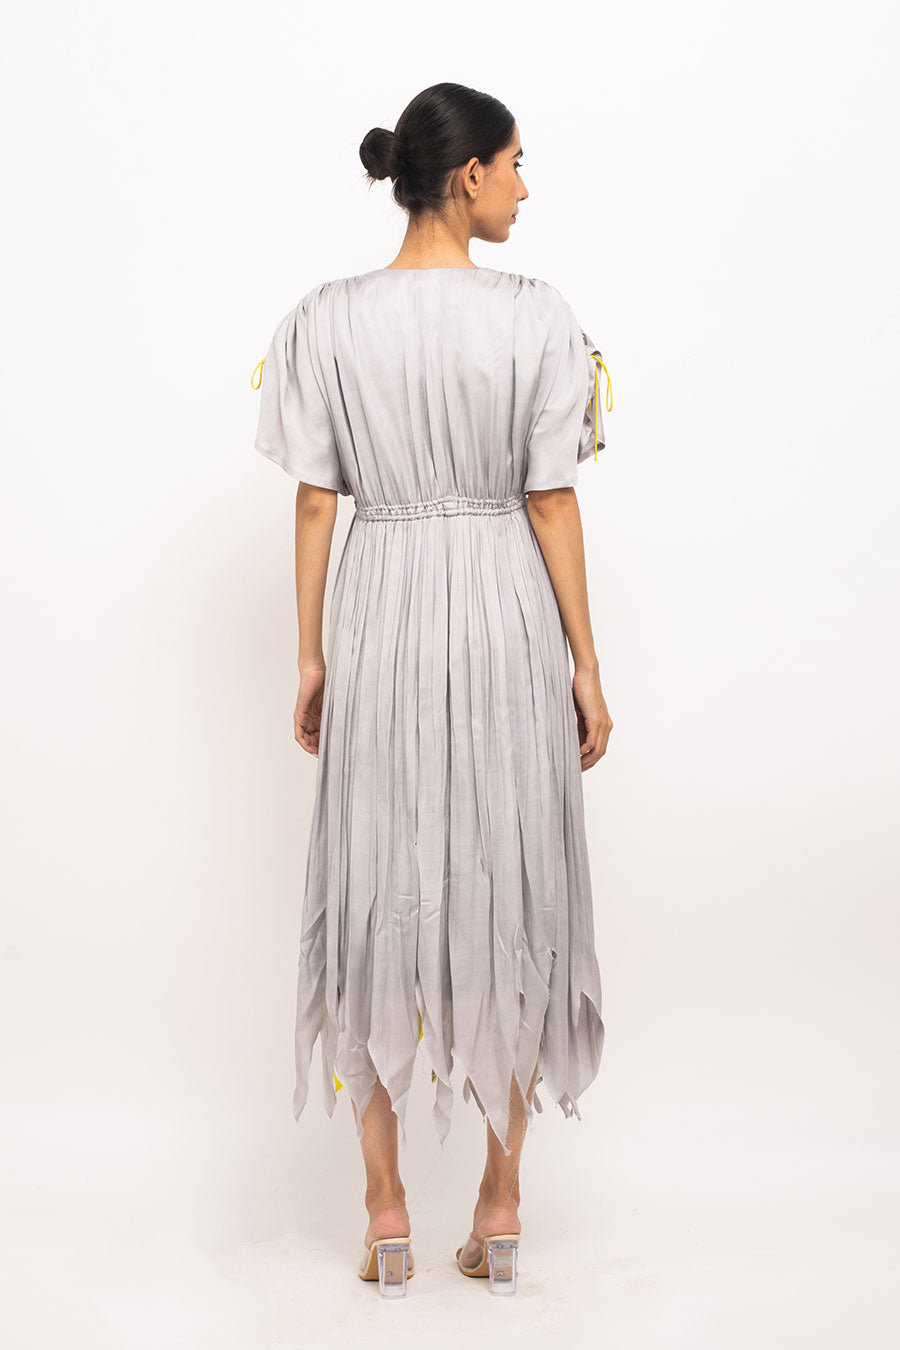 Grey-Yellow Asymmetrical Rouched Dress